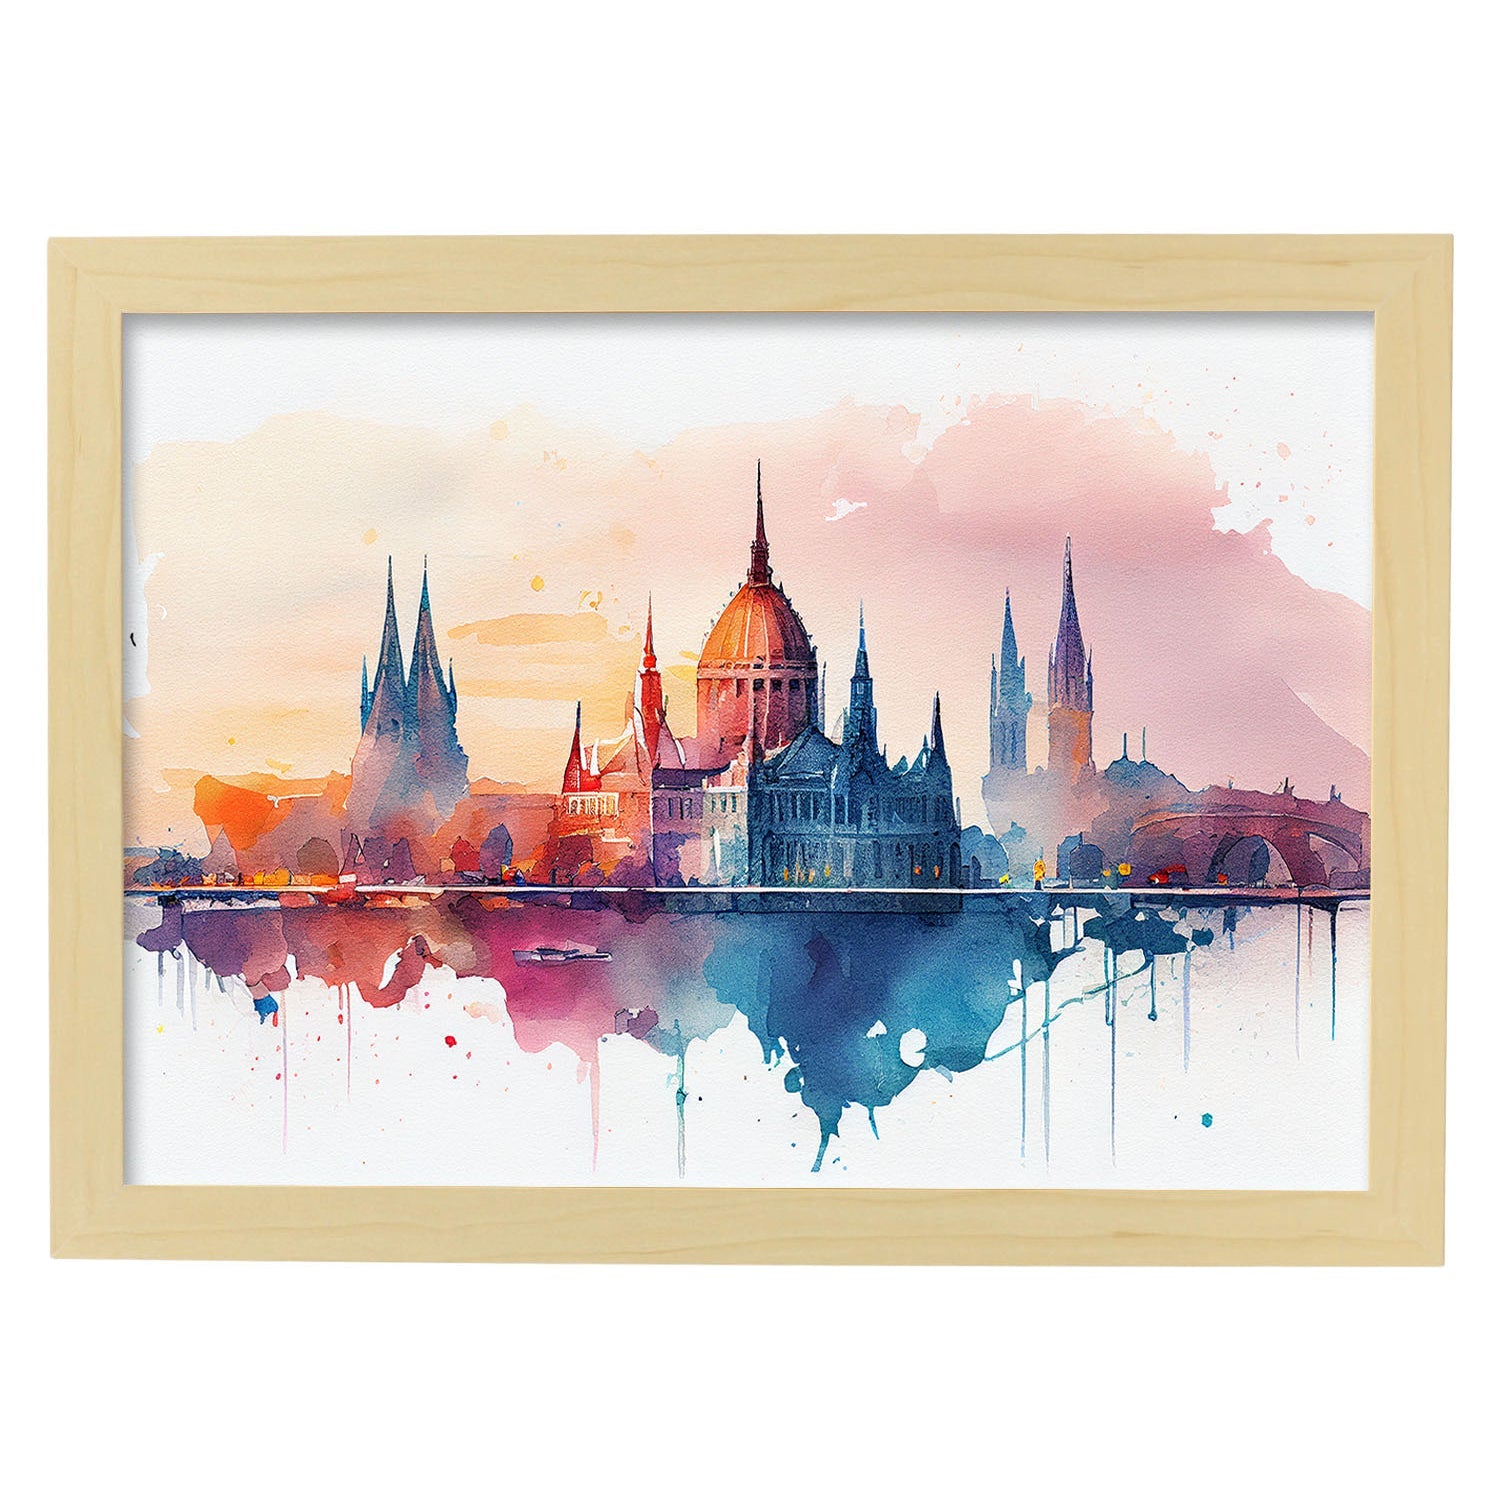 Nacnic watercolor of a skyline of the city of Budapest. Aesthetic Wall Art Prints for Bedroom or Living Room Design.-Artwork-Nacnic-A4-Marco Madera Clara-Nacnic Estudio SL